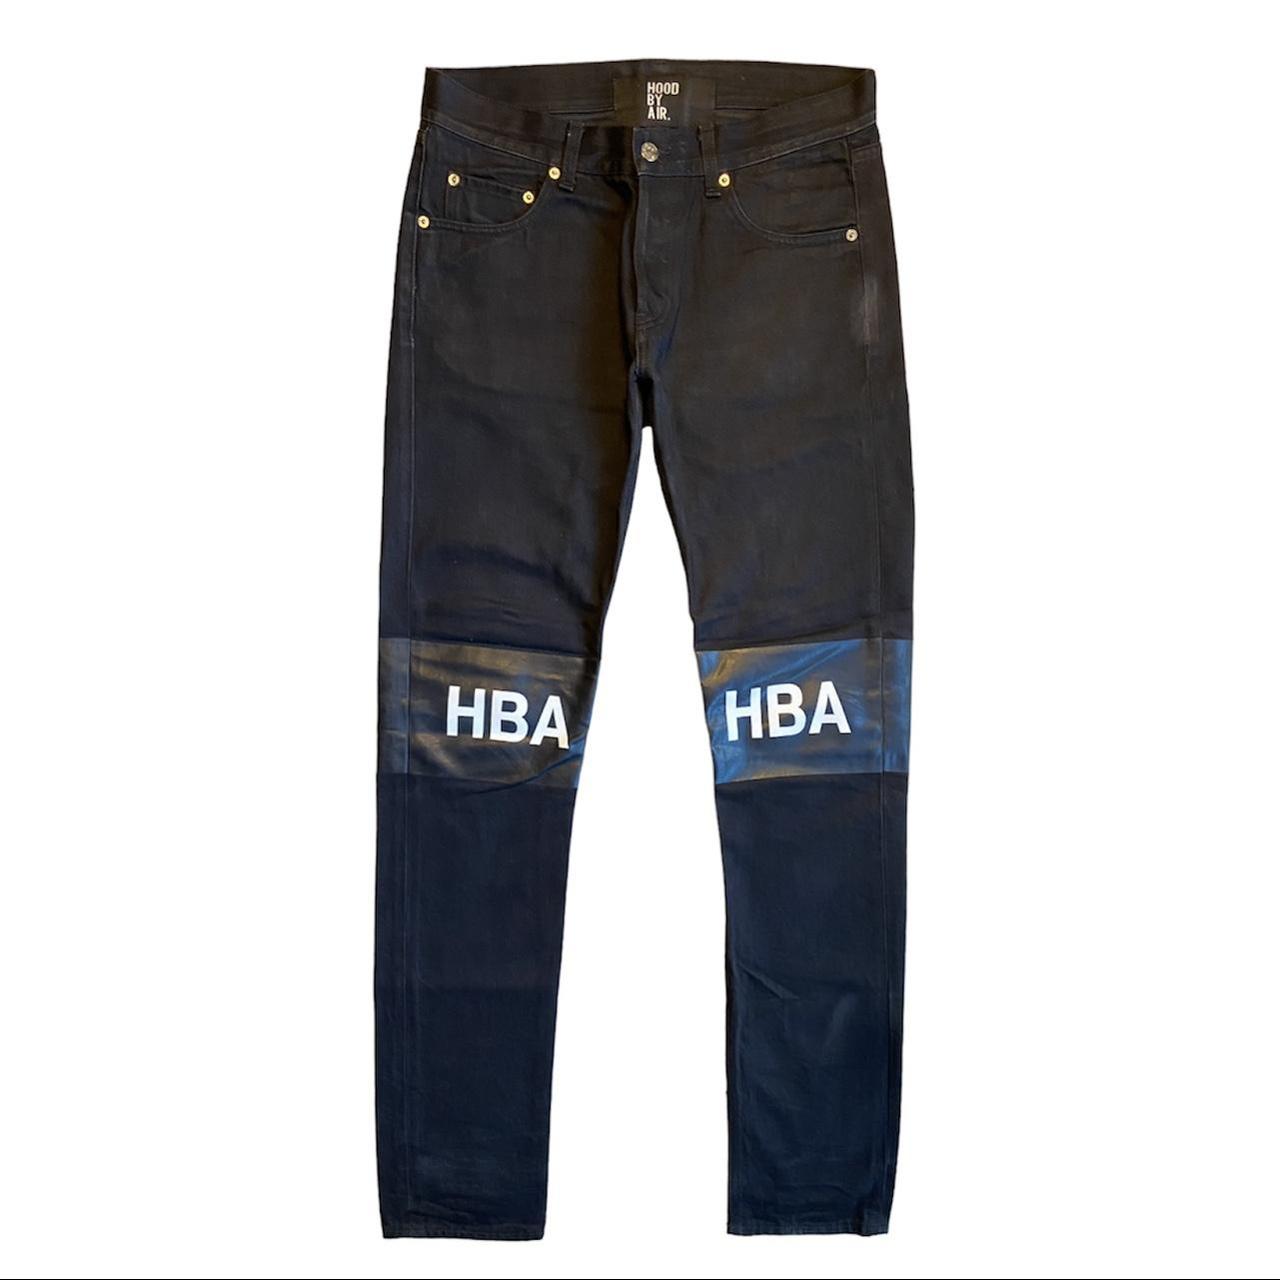 Hood By Air Men's Black and White Jeans